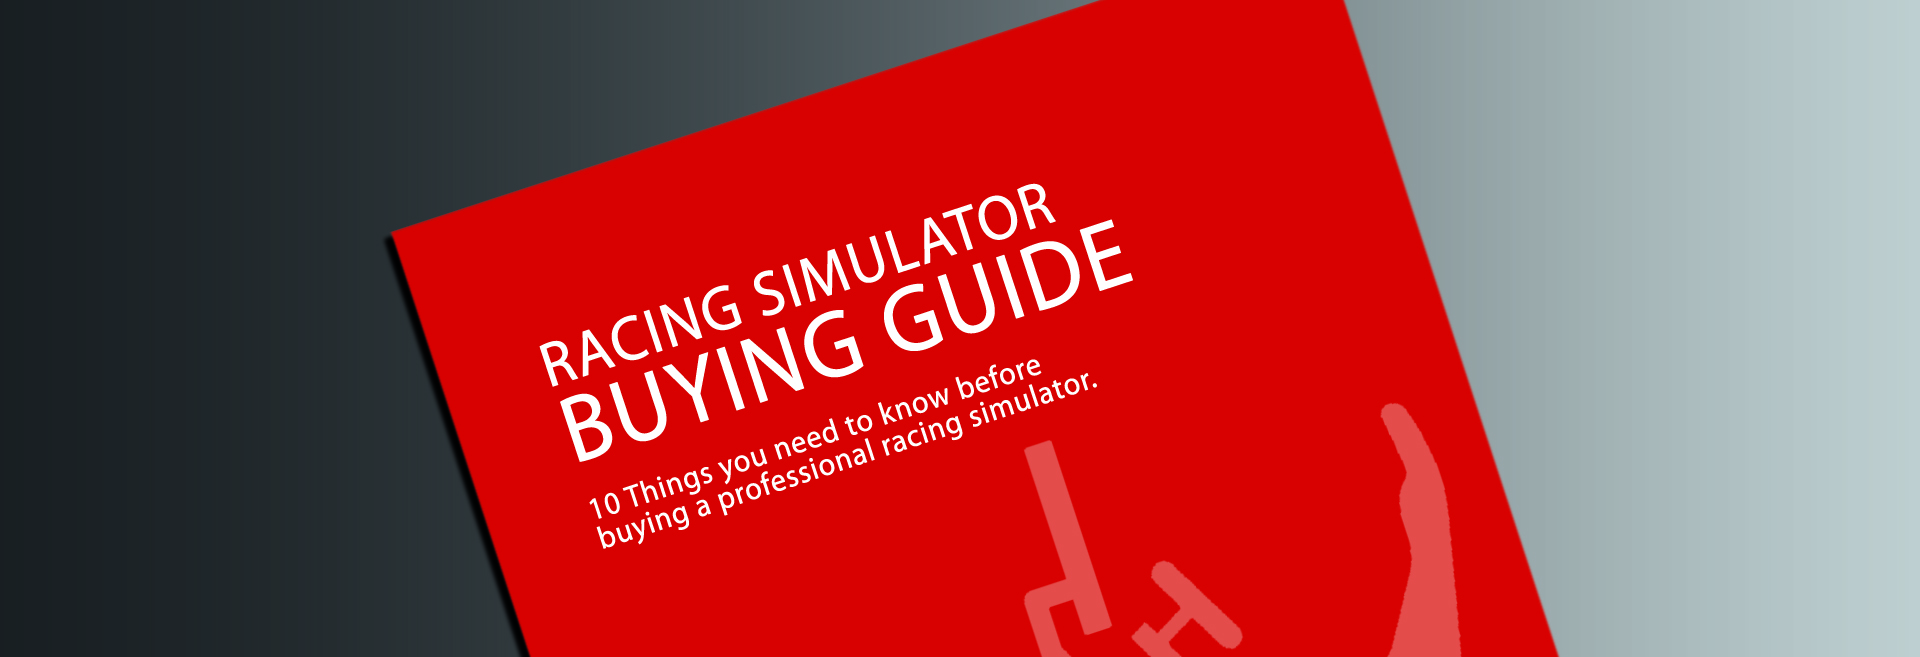 10 Thing you need to know before buying a racing simulator